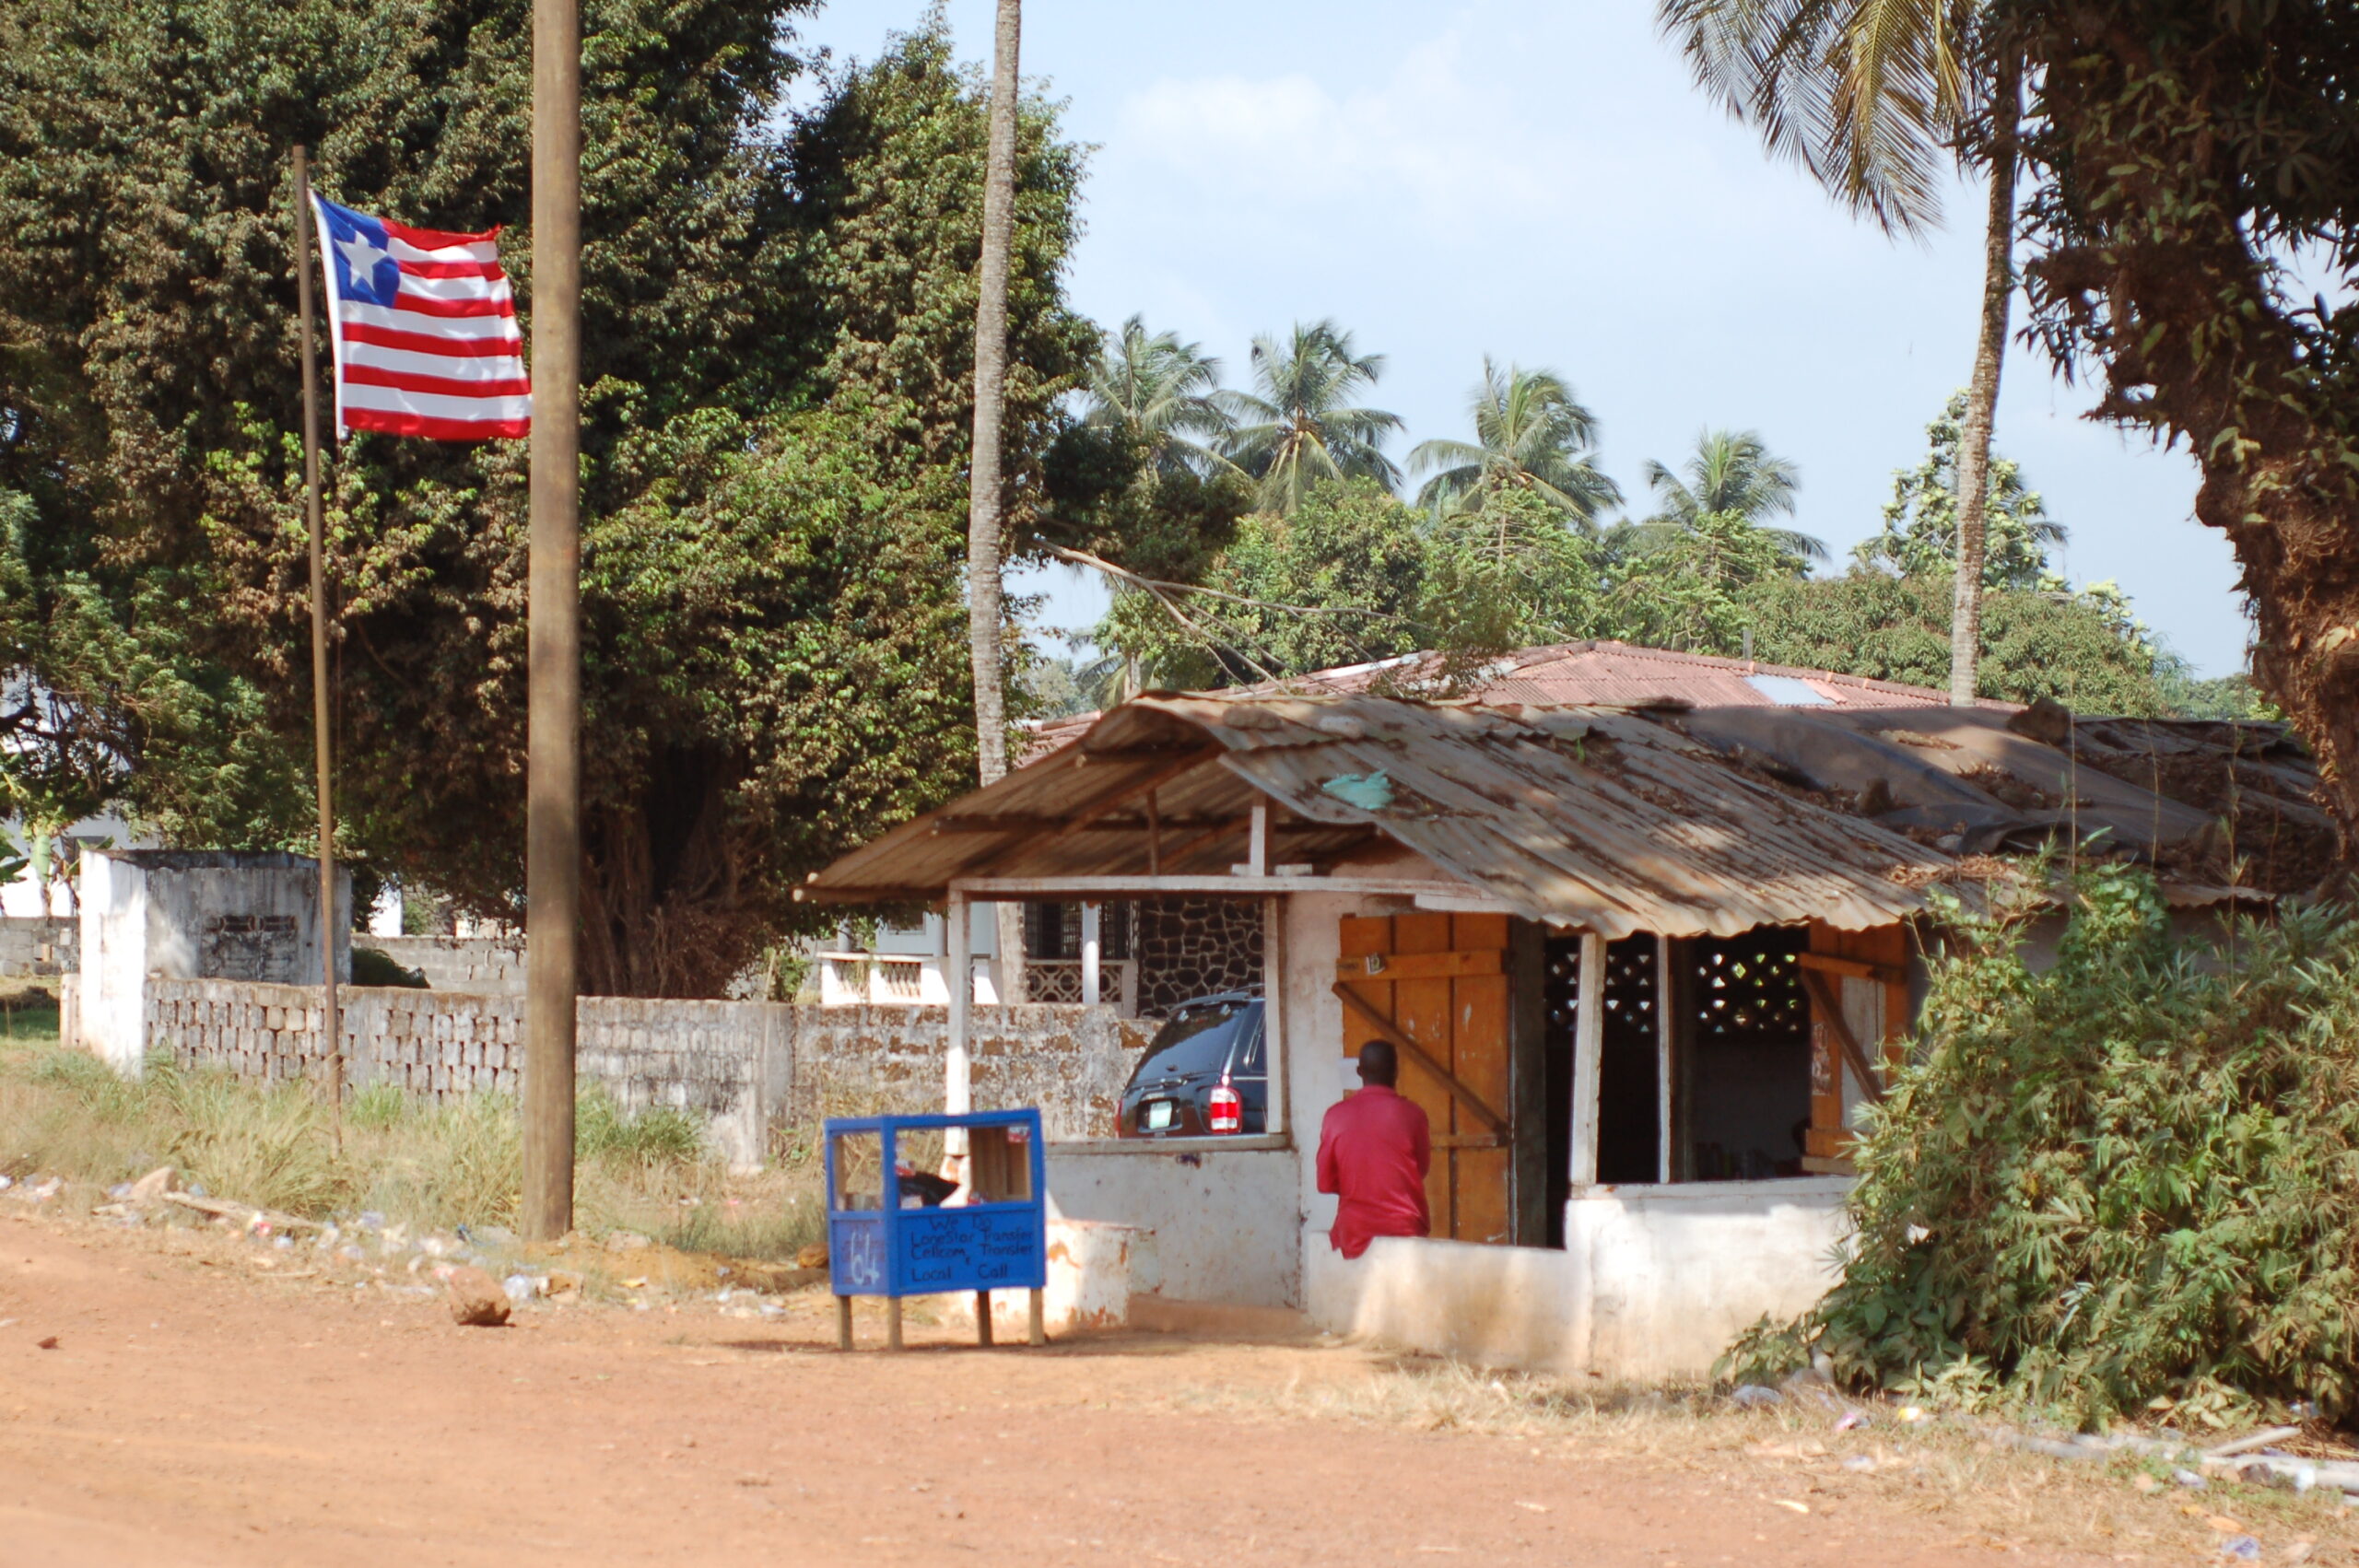 The Liberian flag waves above a building.